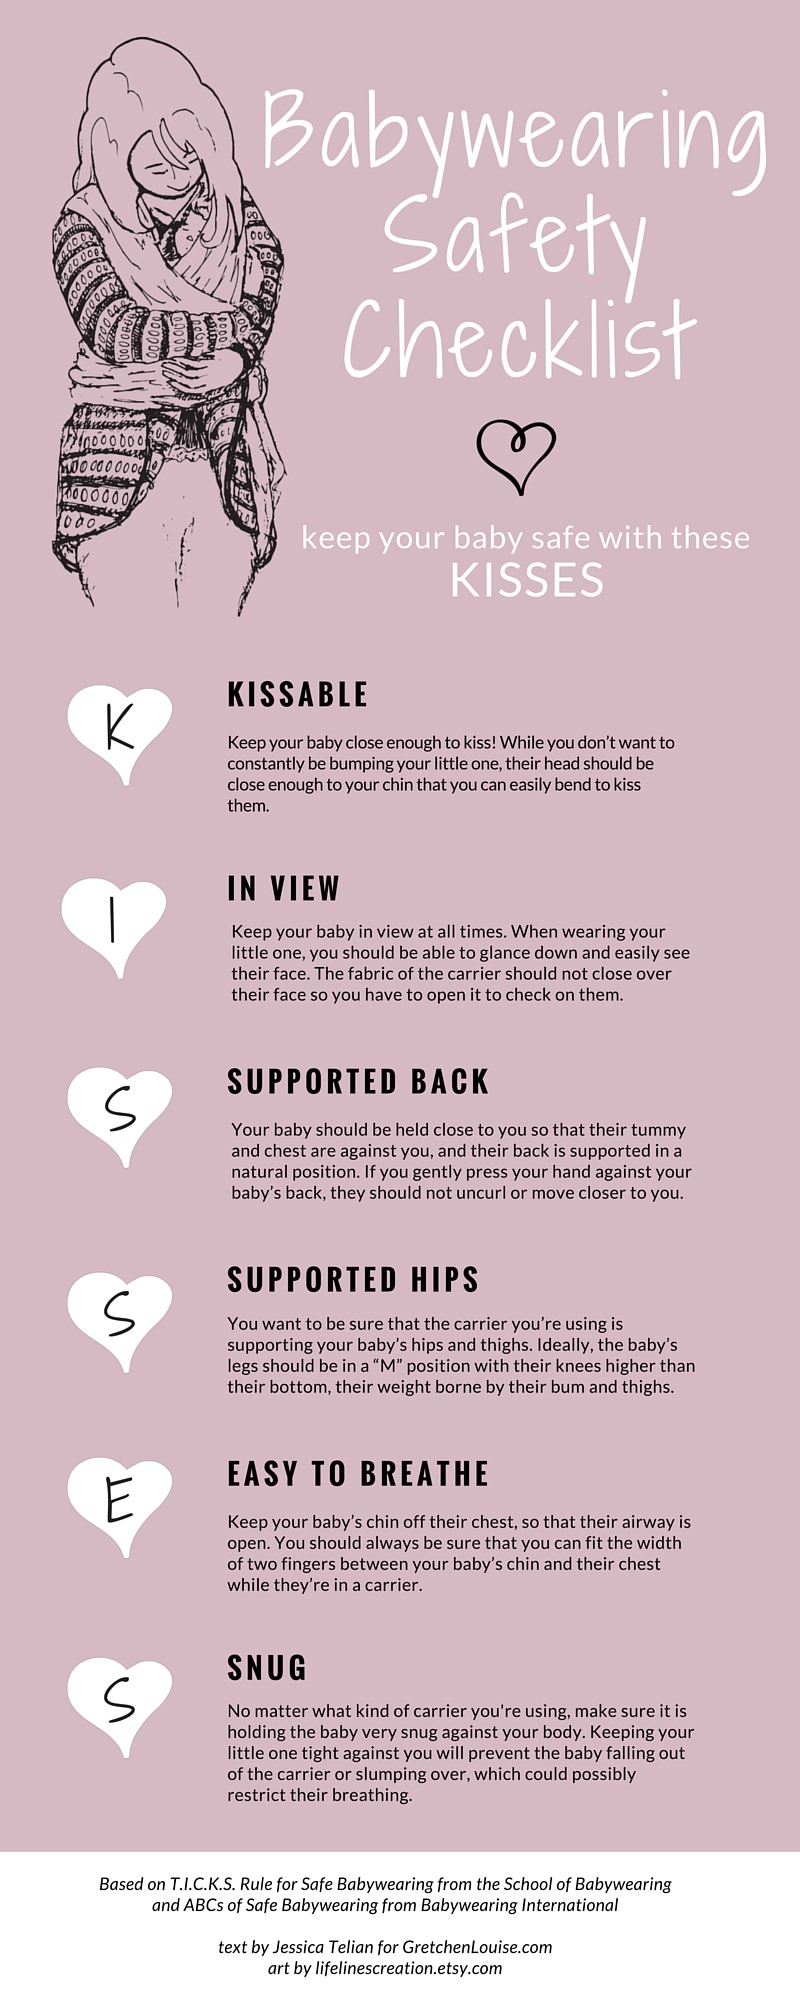 K.I.S.S.E.S. Babywearing Safety Checklist (Based on T.I.C.K.S. Rule for Safe Babywearing from the School of Babywearing and ABCs of Safe Babywearing from Babywearing International)